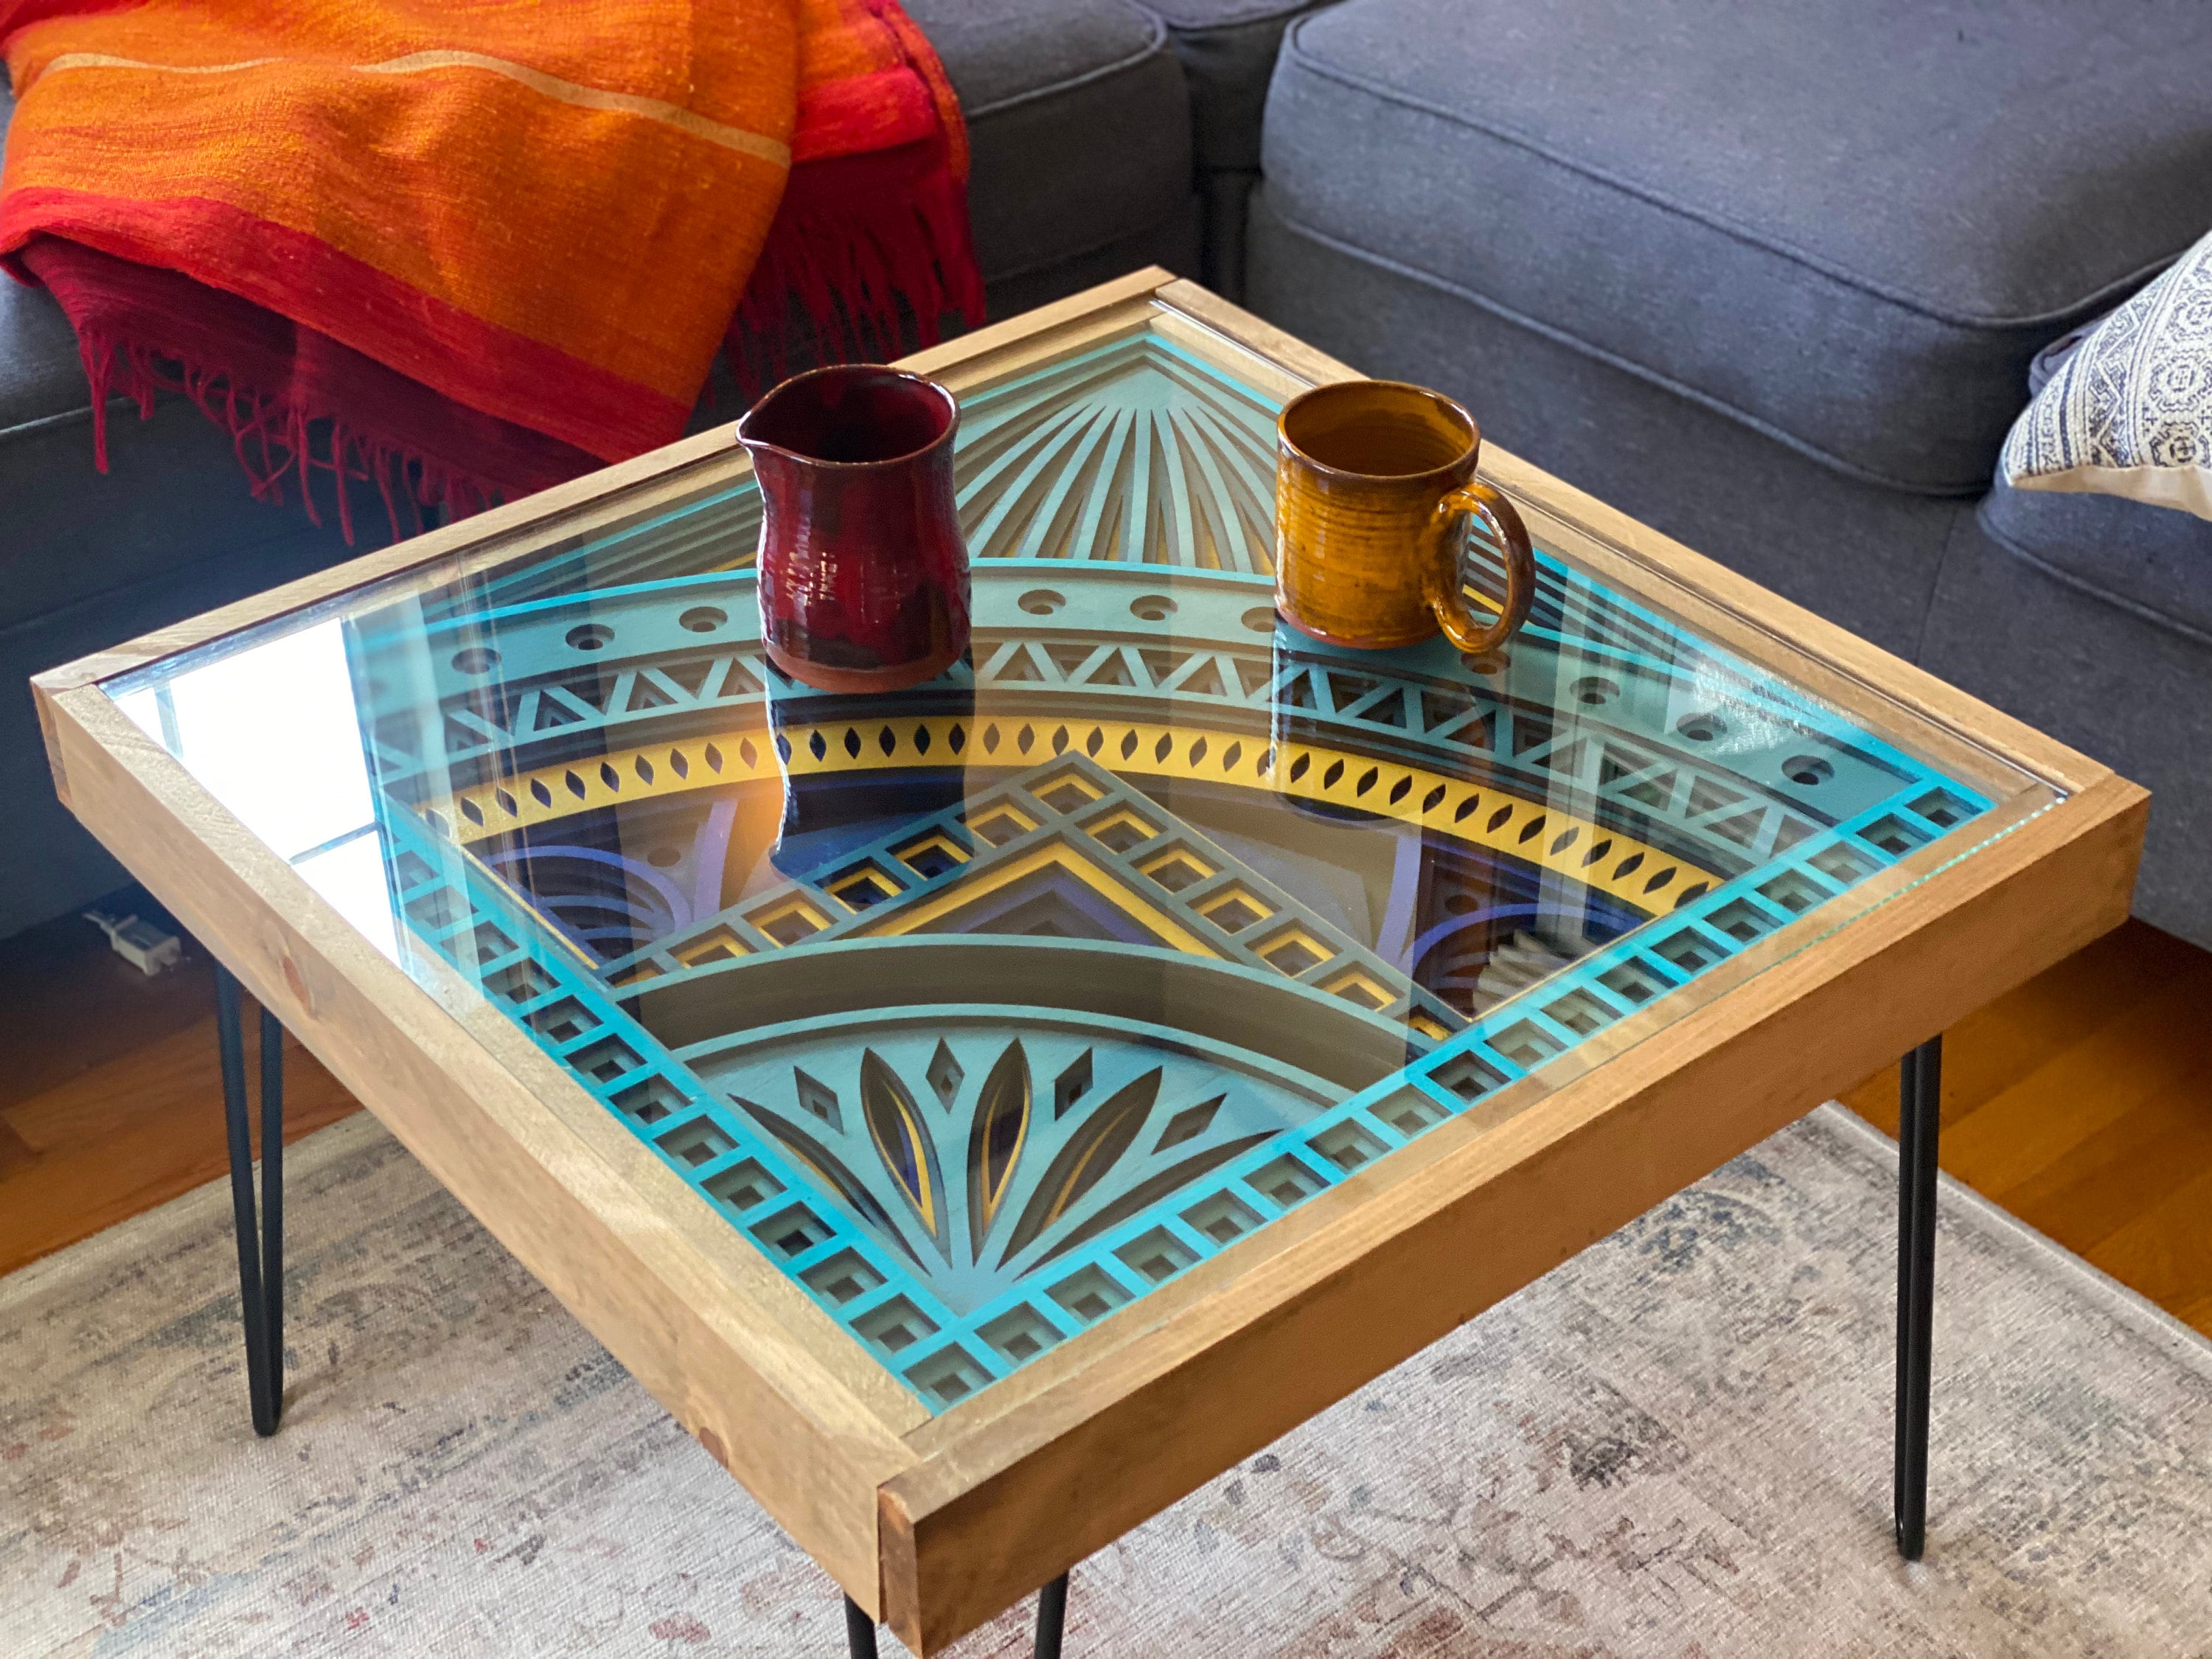 Turquoise, Aqua, and Bright Yellow Mandala Coffee Table - 100% Made in the USA - 25x25"